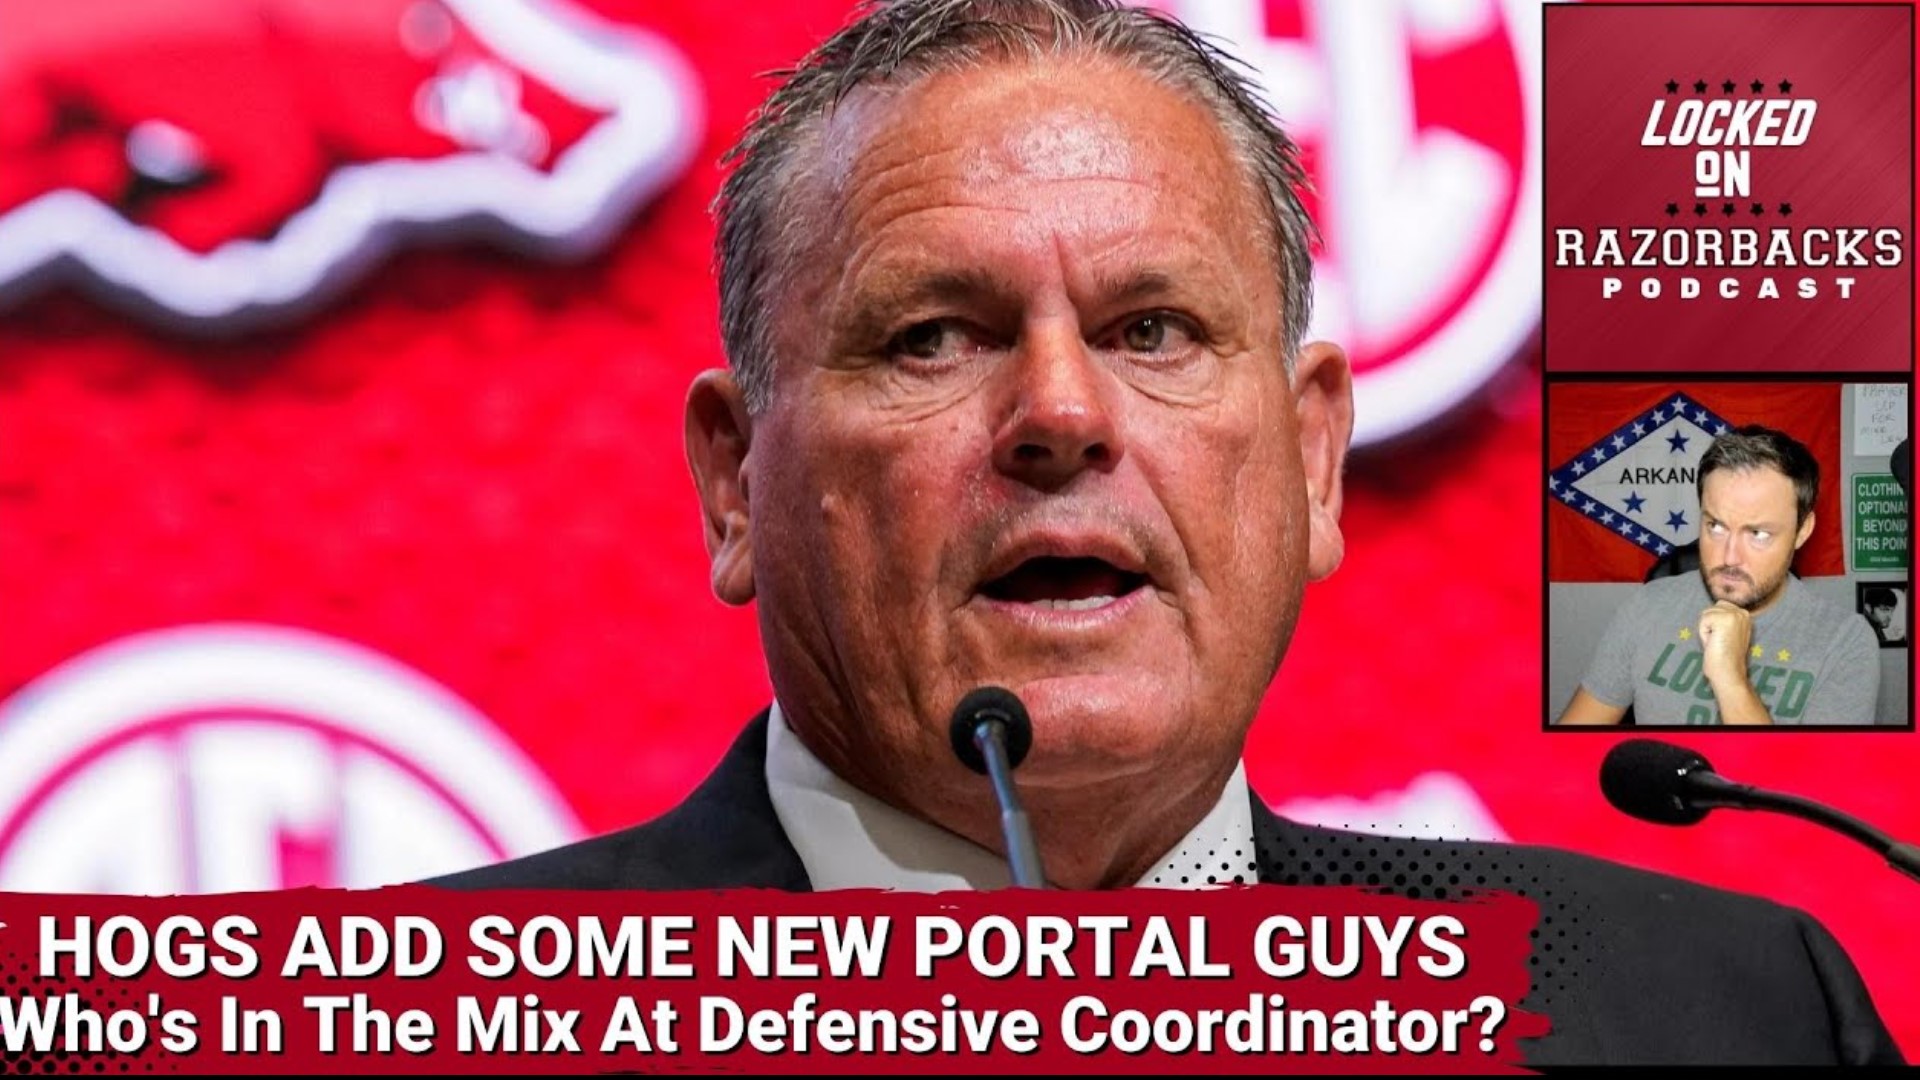 John Nabors gives updates on the Razorback Football team bringing in new crucial additions from the transfer portal and the latest on a new defensive coordinator.